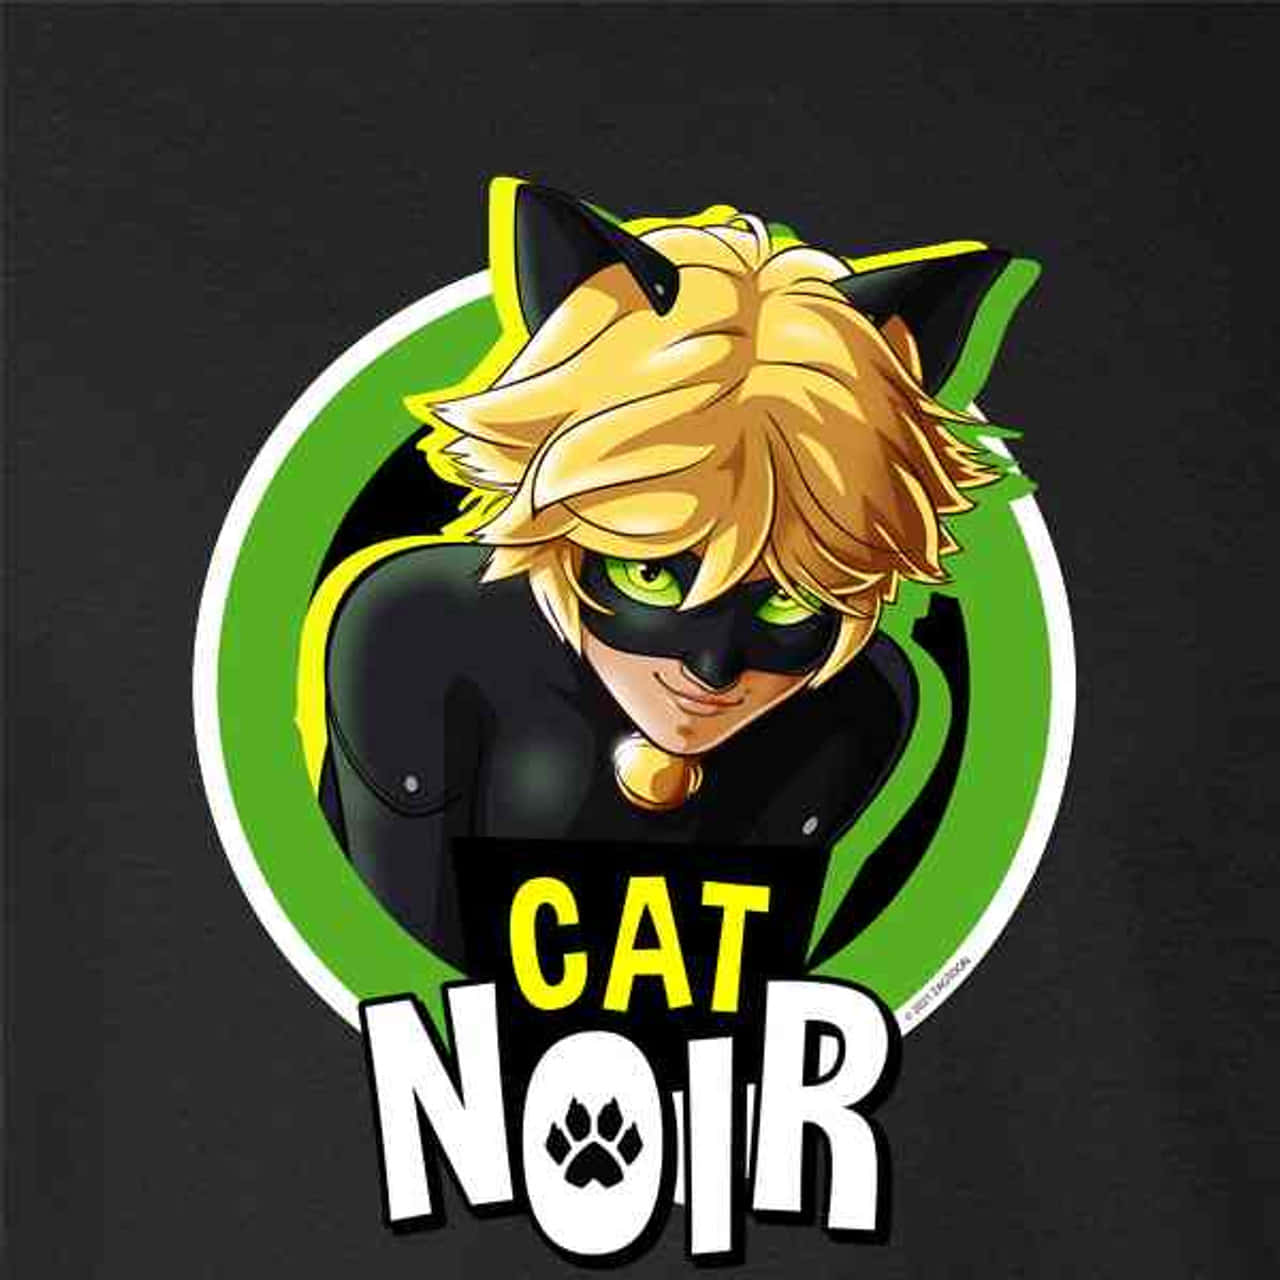 "Introducing Cat Noir - a modern twist on the classic heroes we have grown to love!"